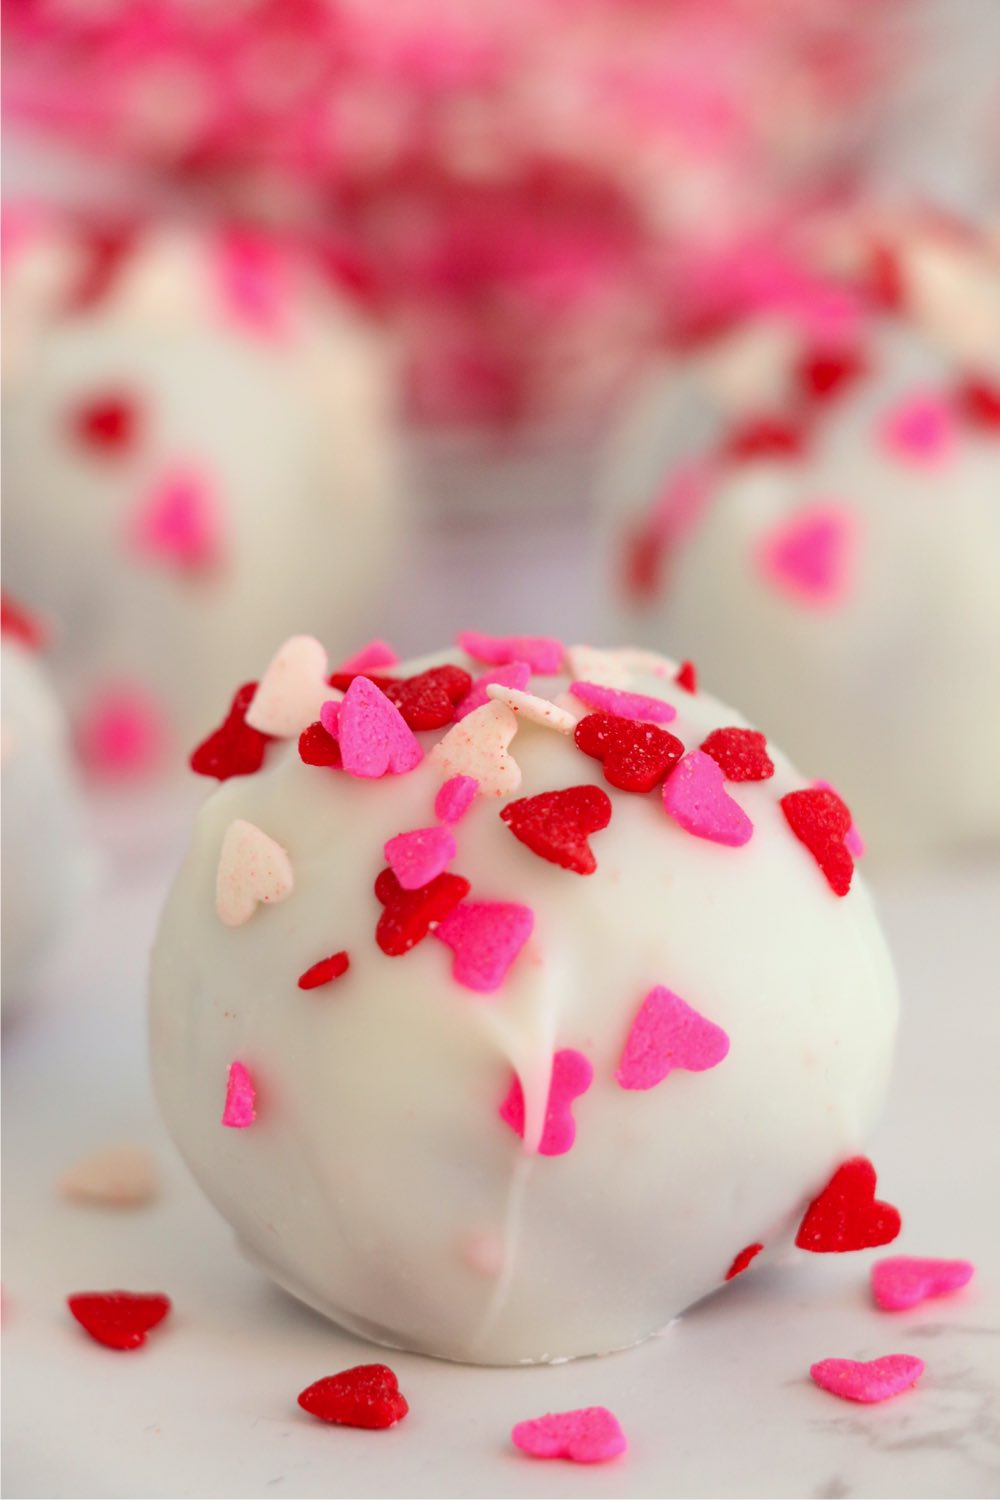 Valentines' truffle covered in sprinkles